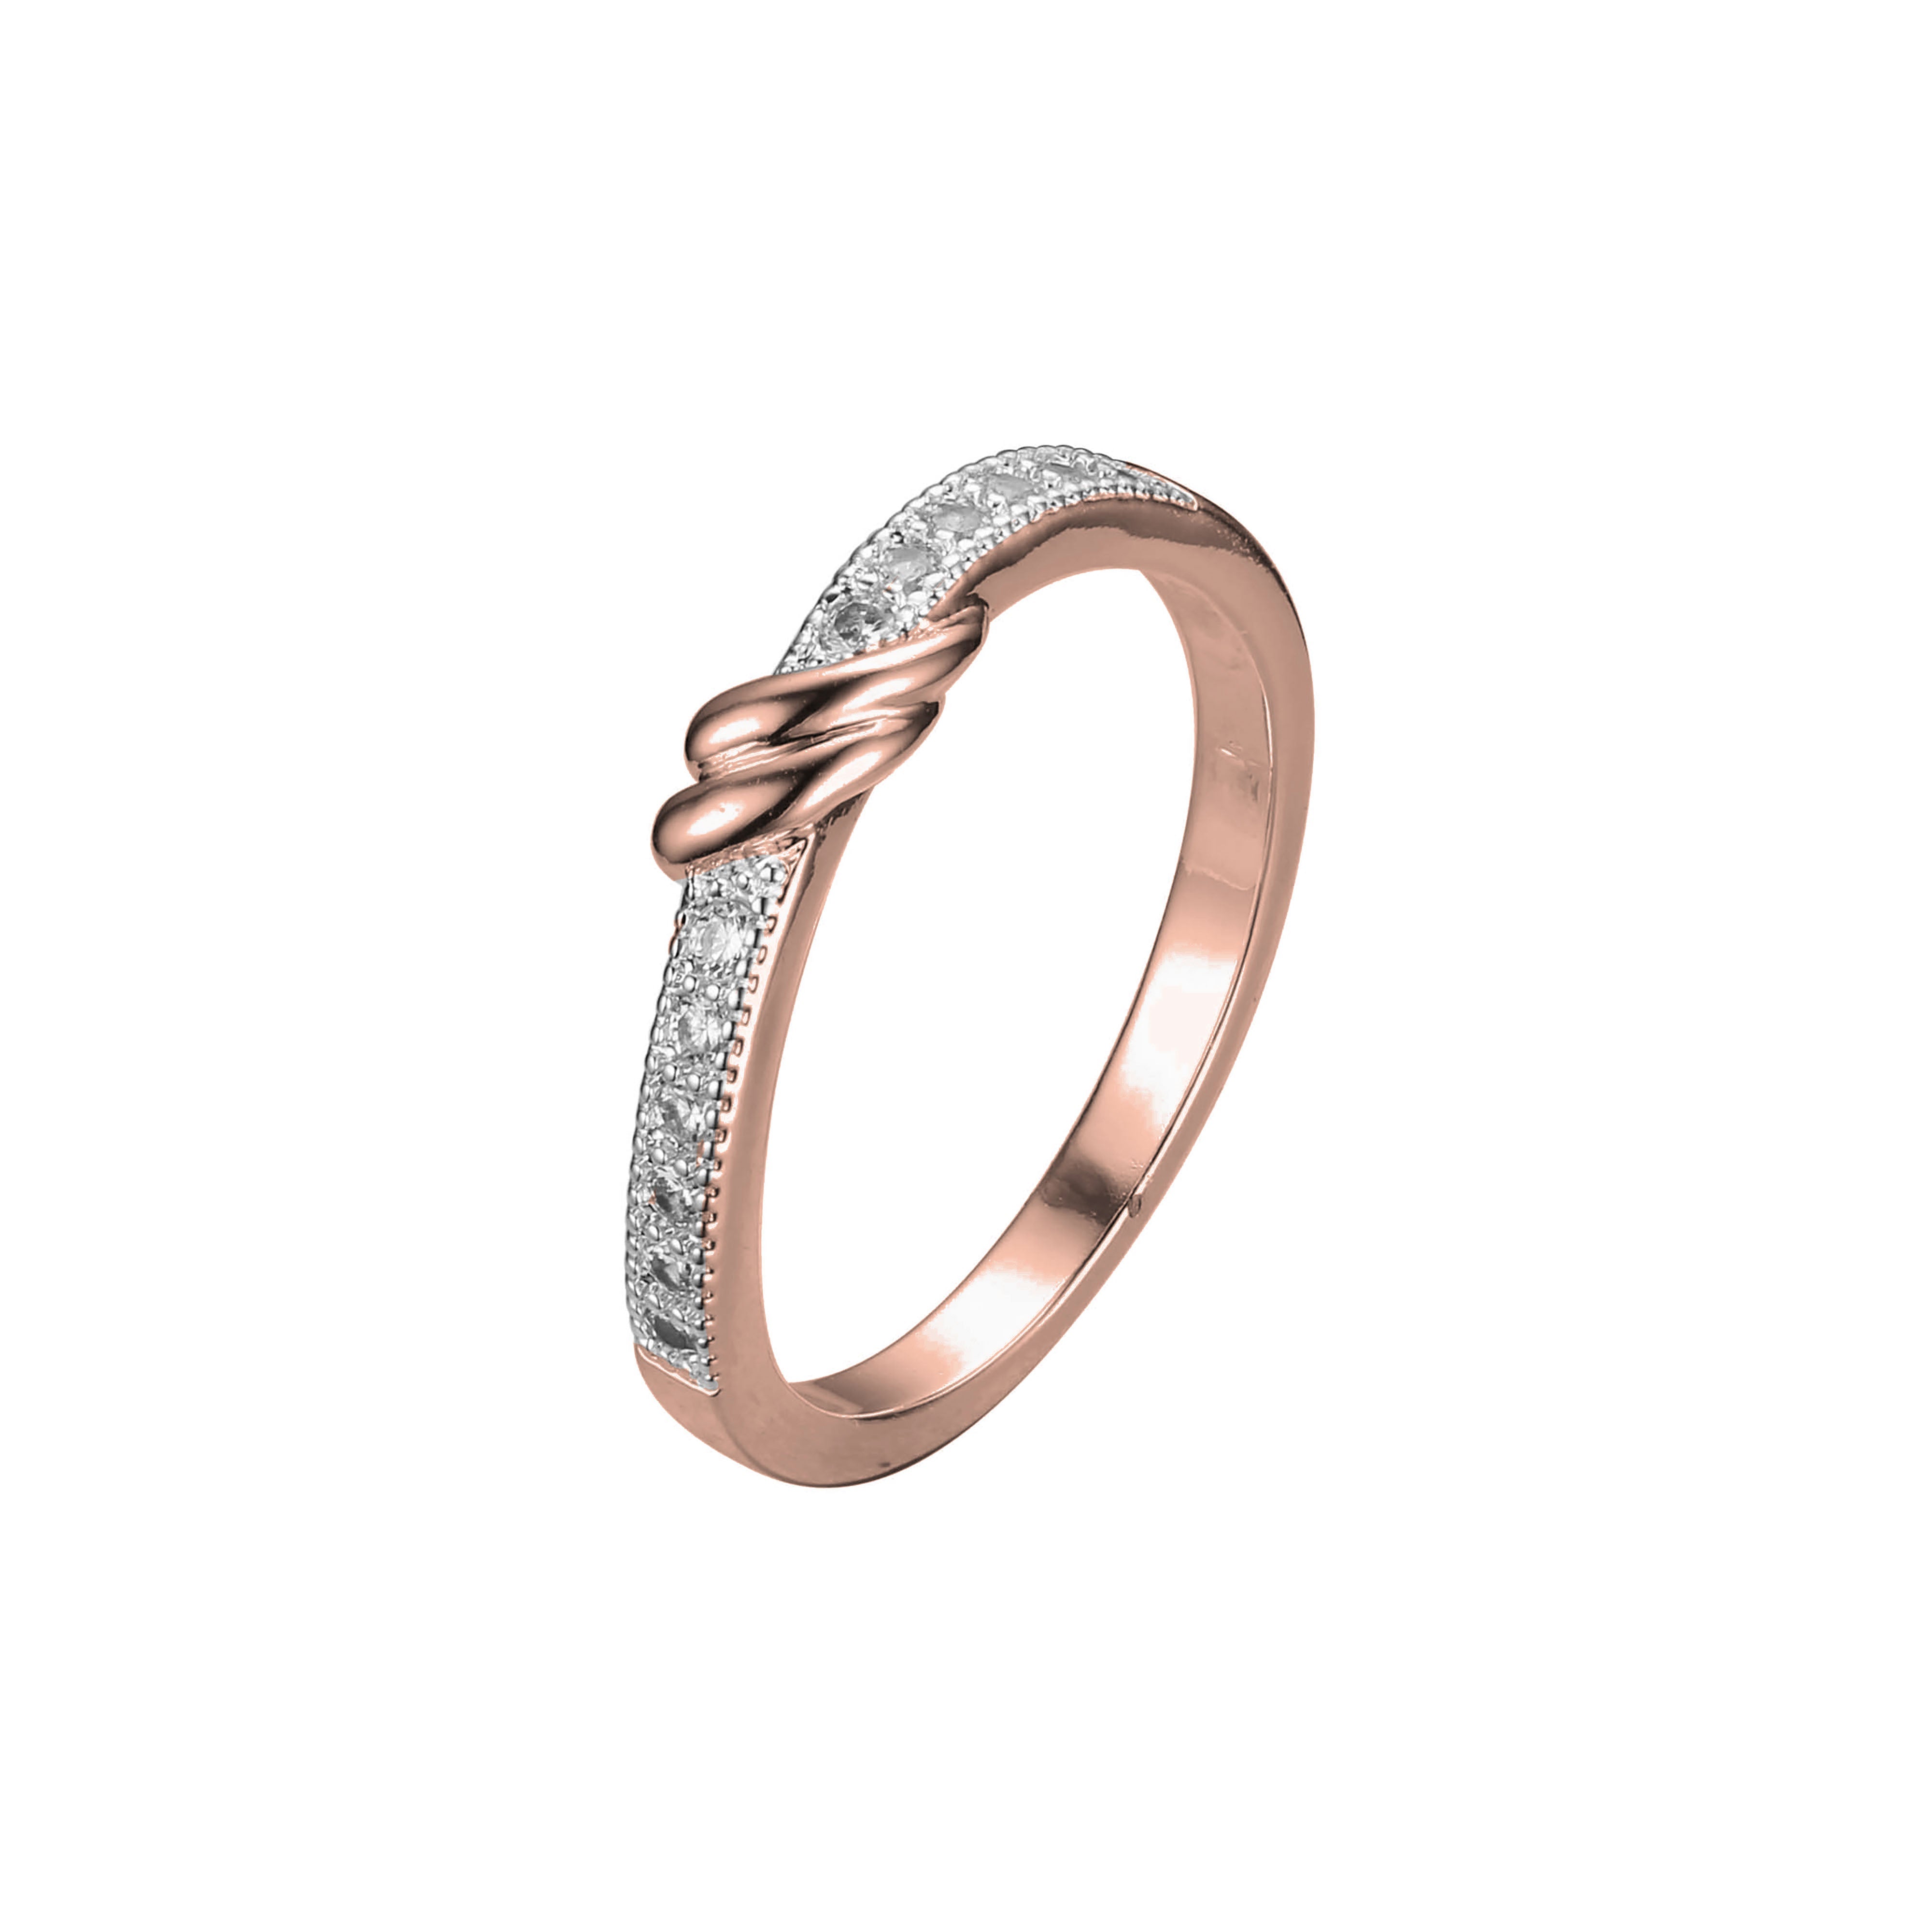 Double band Wedding band rings in 18K Gold, White Gold, Rose Gold, 14K Gold, two tone plating colors